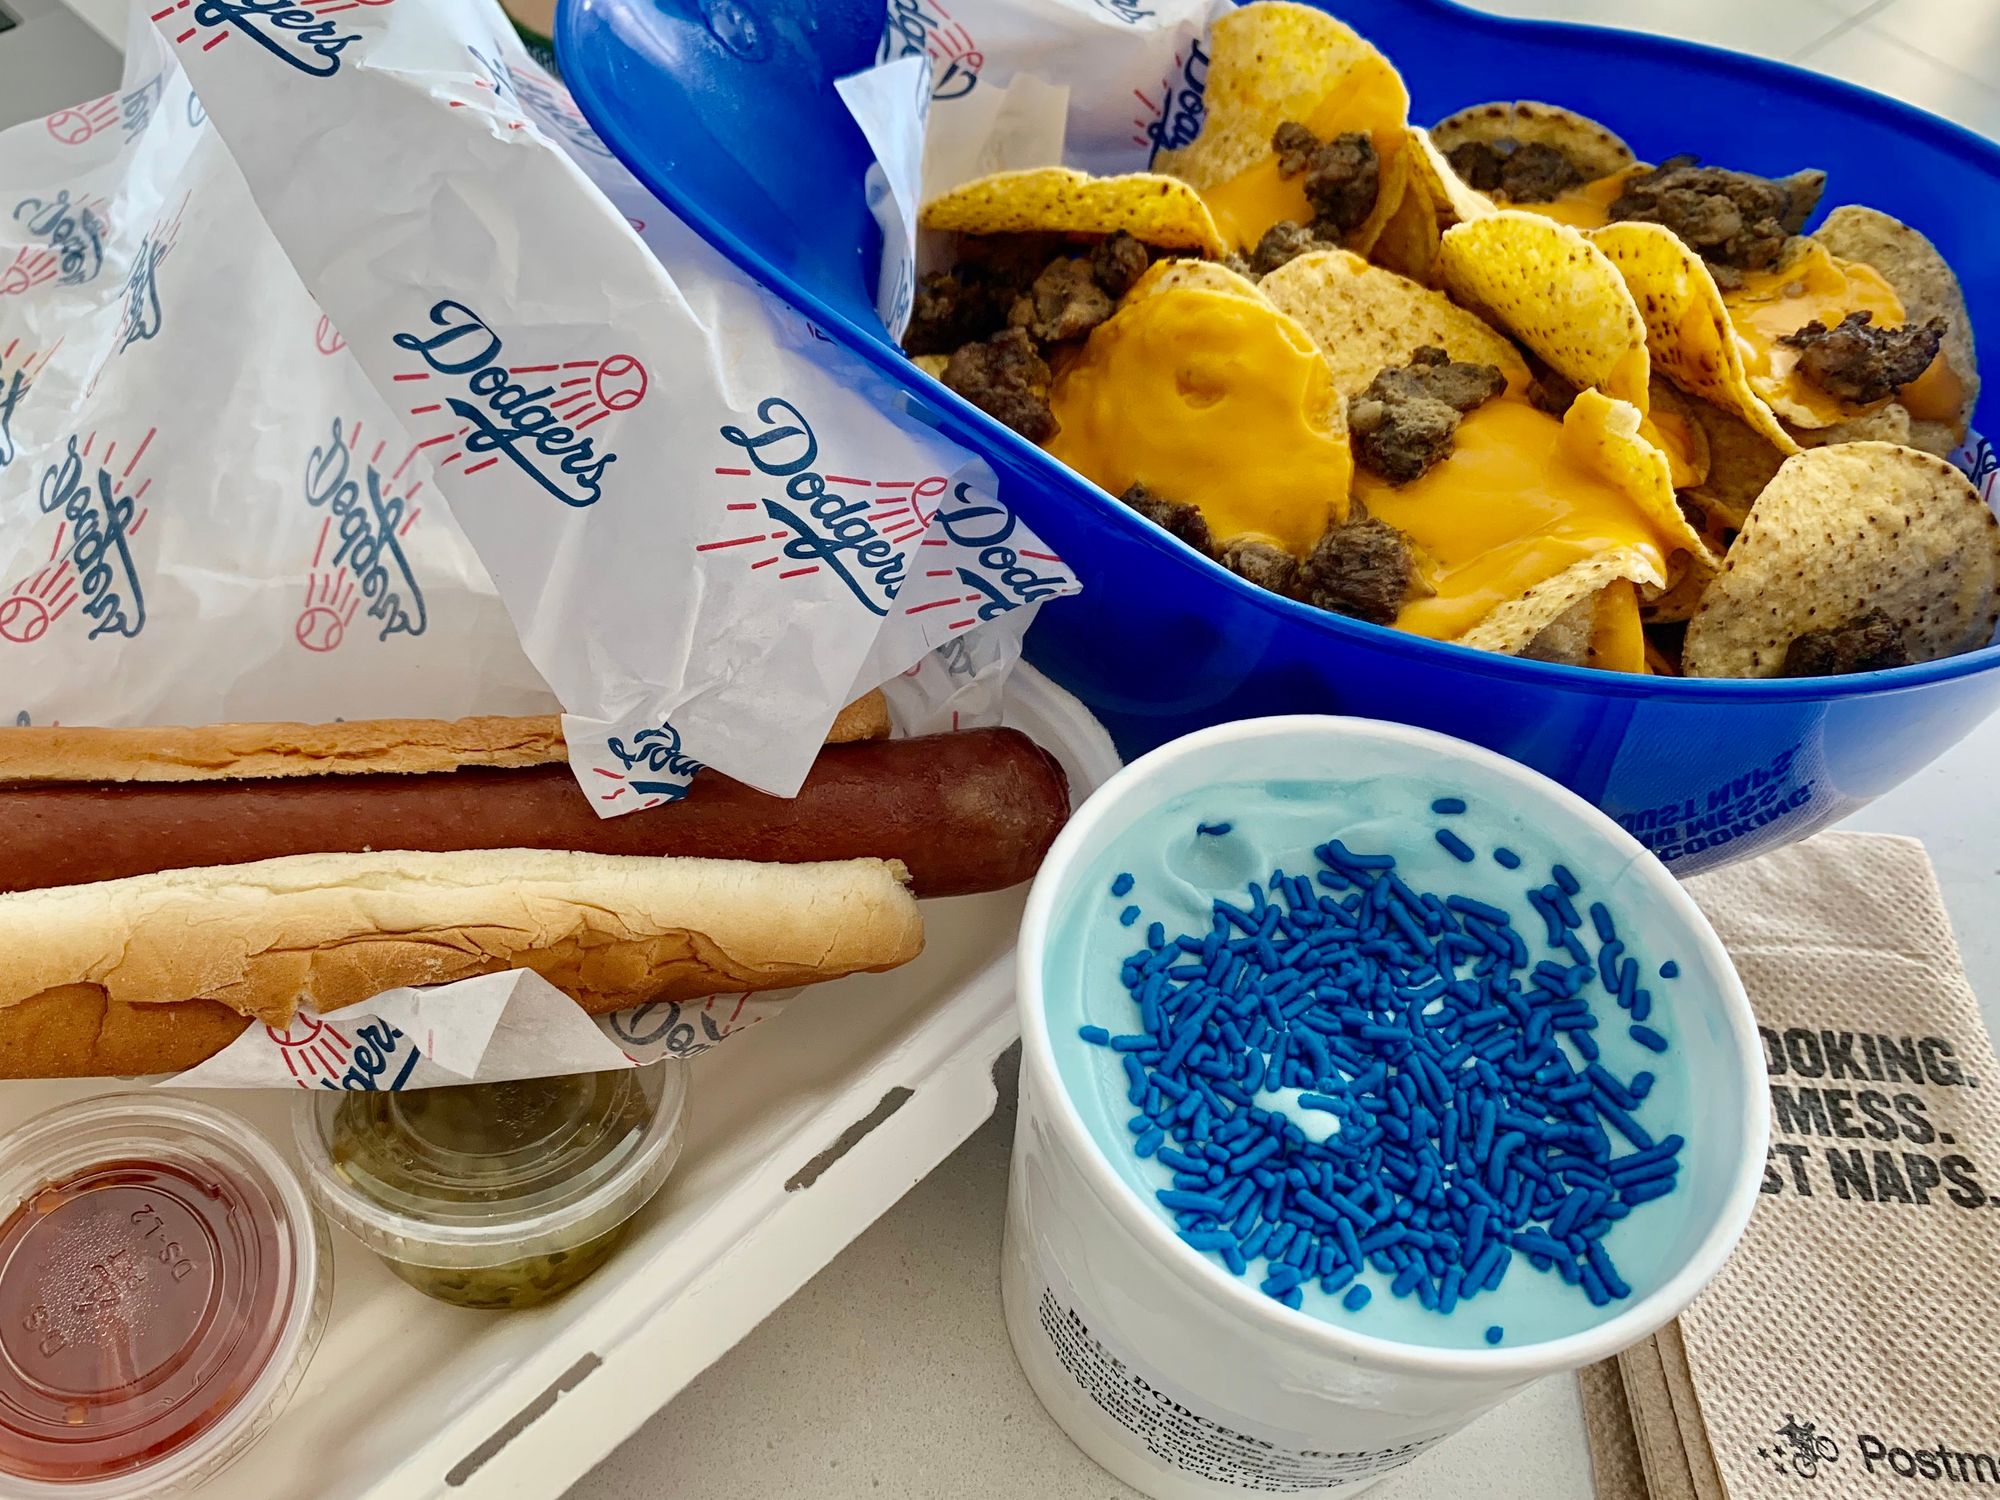 You Can Now Order Dodger Stadium Food Directly to Your Couch. We Tried It.